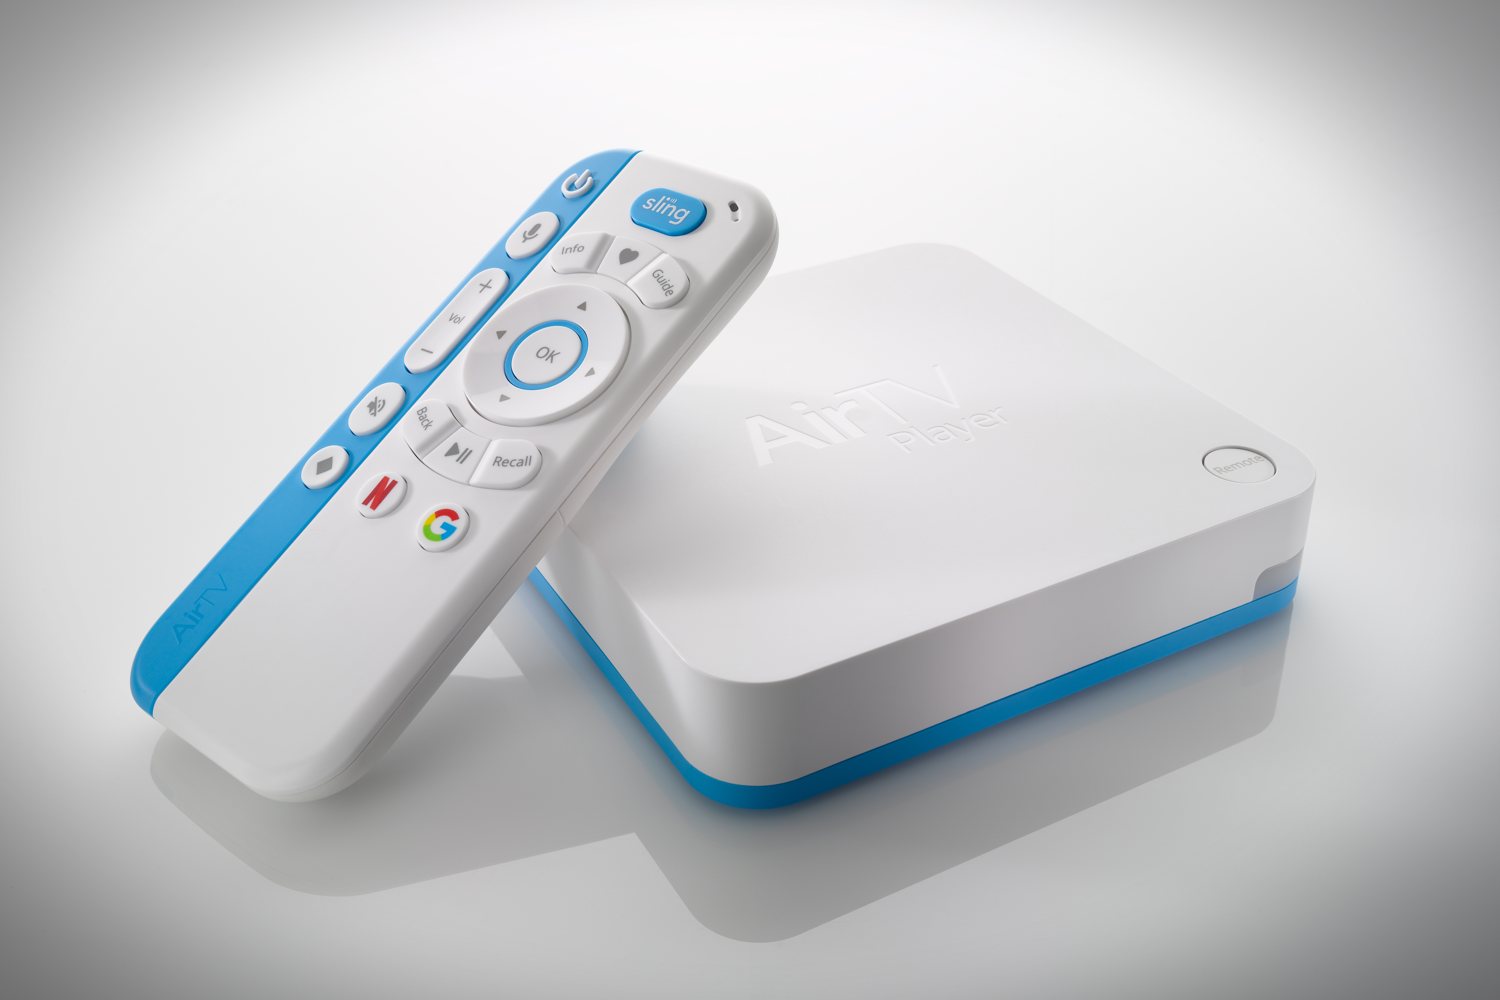 Airtv combines streaming and local channels so you can ditch cable